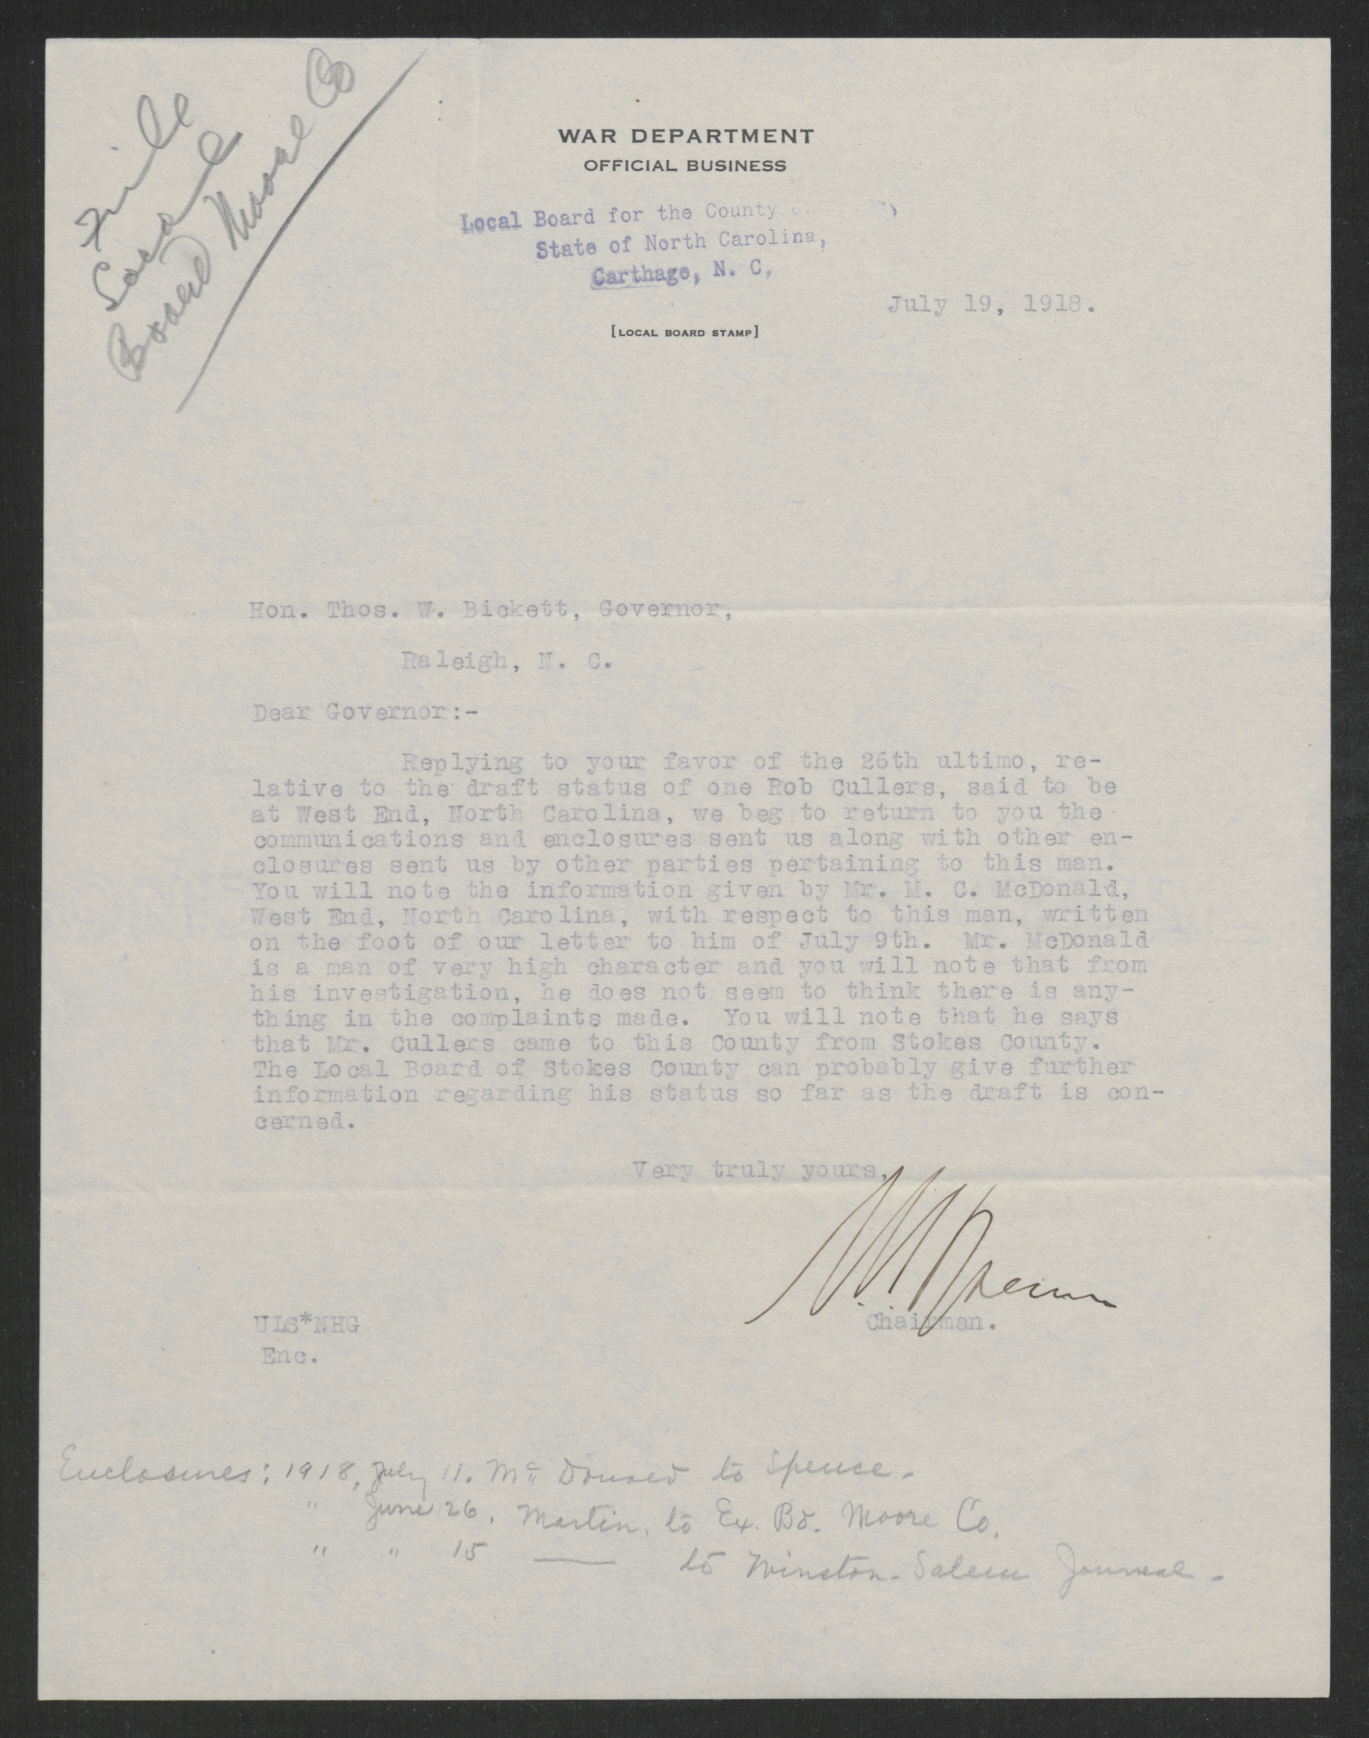 Letter from Union L. Spence to Thomas W. Bickett, July 19, 1918